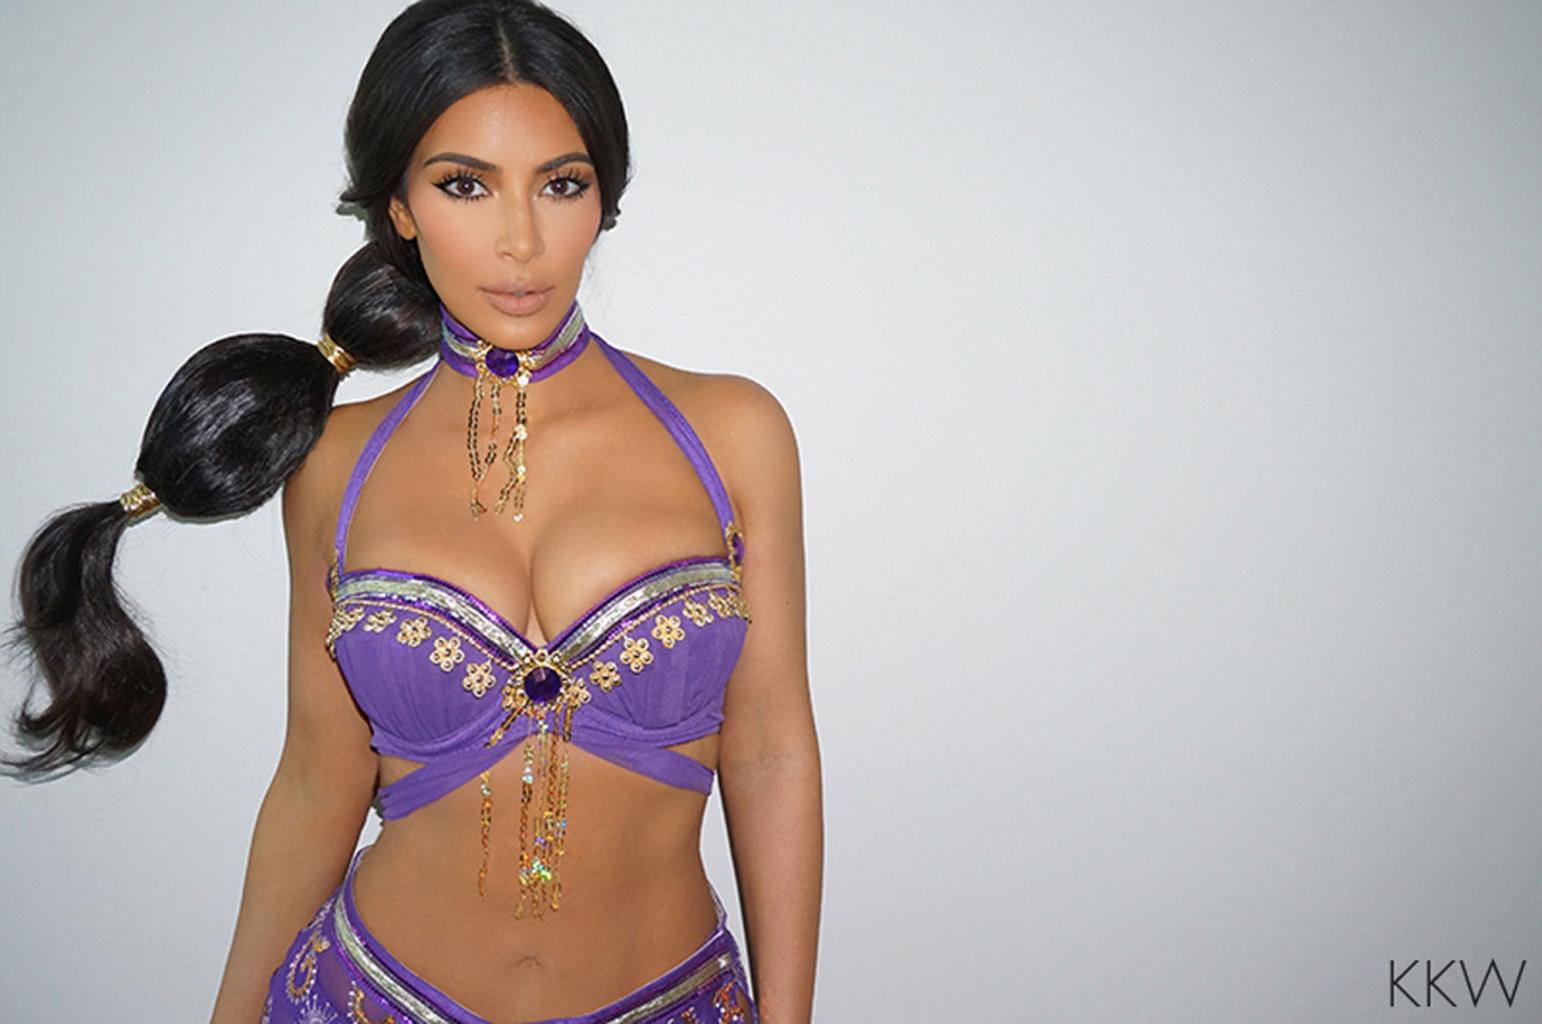 Kim Kardashian       's Second Halloween Costume Revealed! See Her Sexy Belly Dancer Outfit